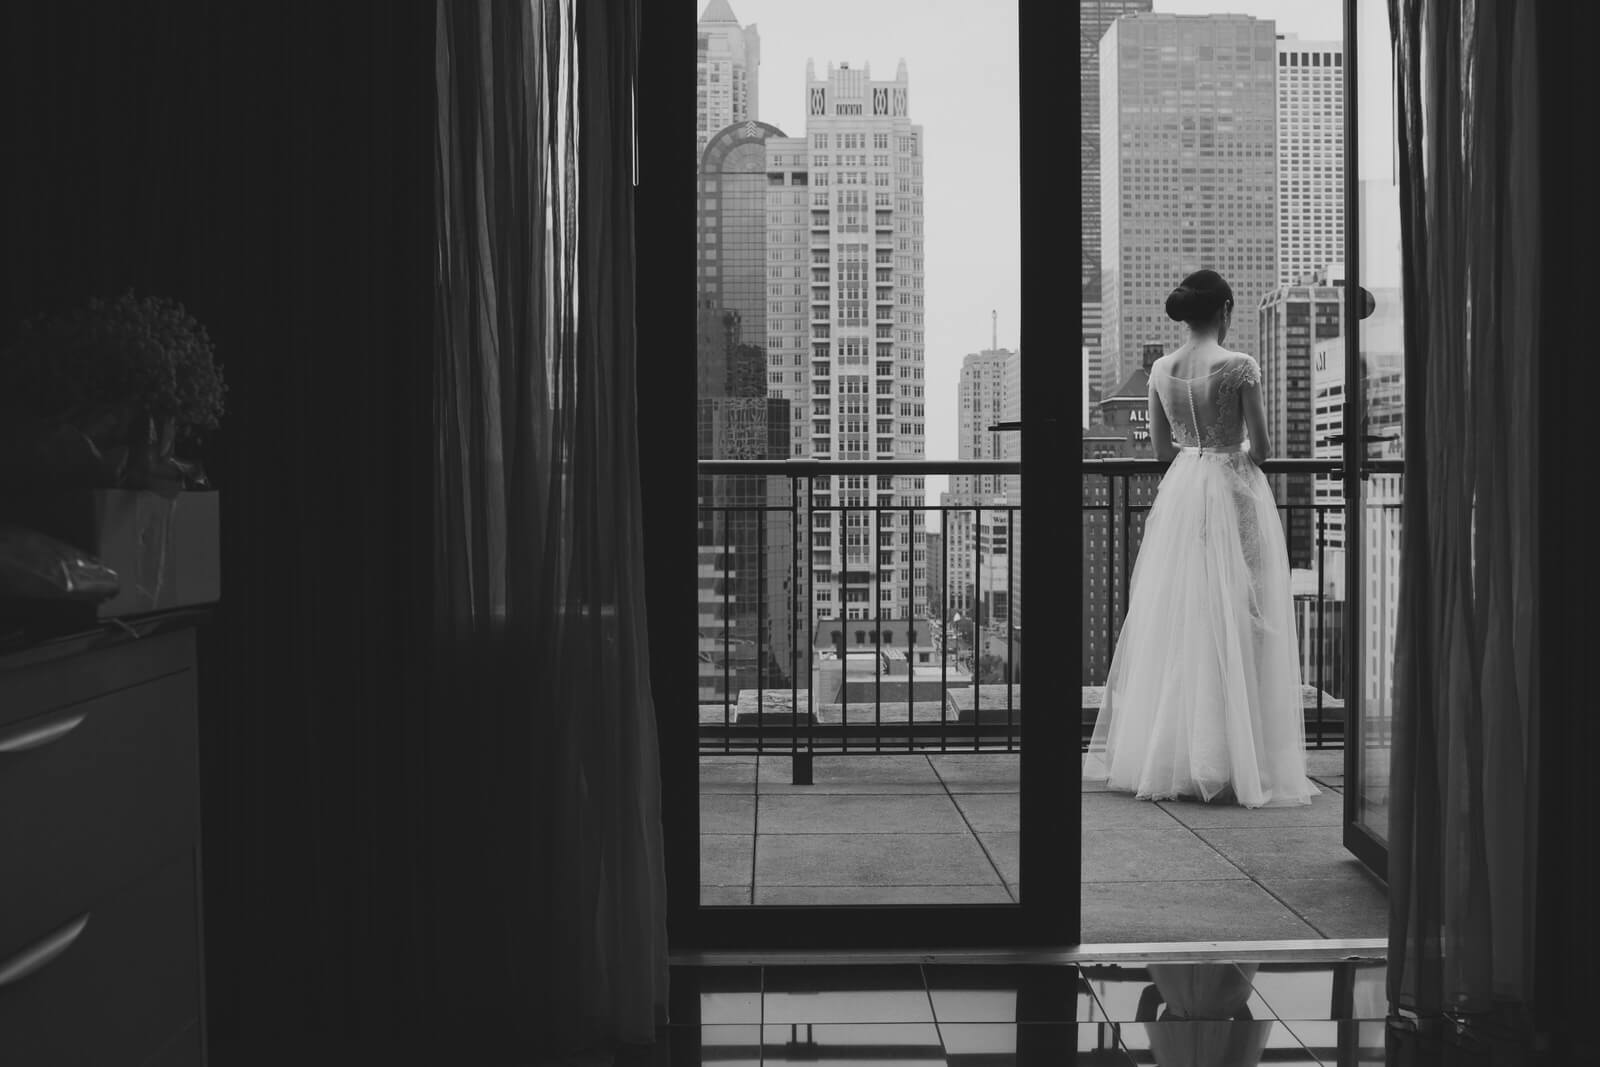 Adam Lowe photography, Columbus, Ohio, wedding, bride and groom, style, cool, editorial, fashion, downtown, Chicago